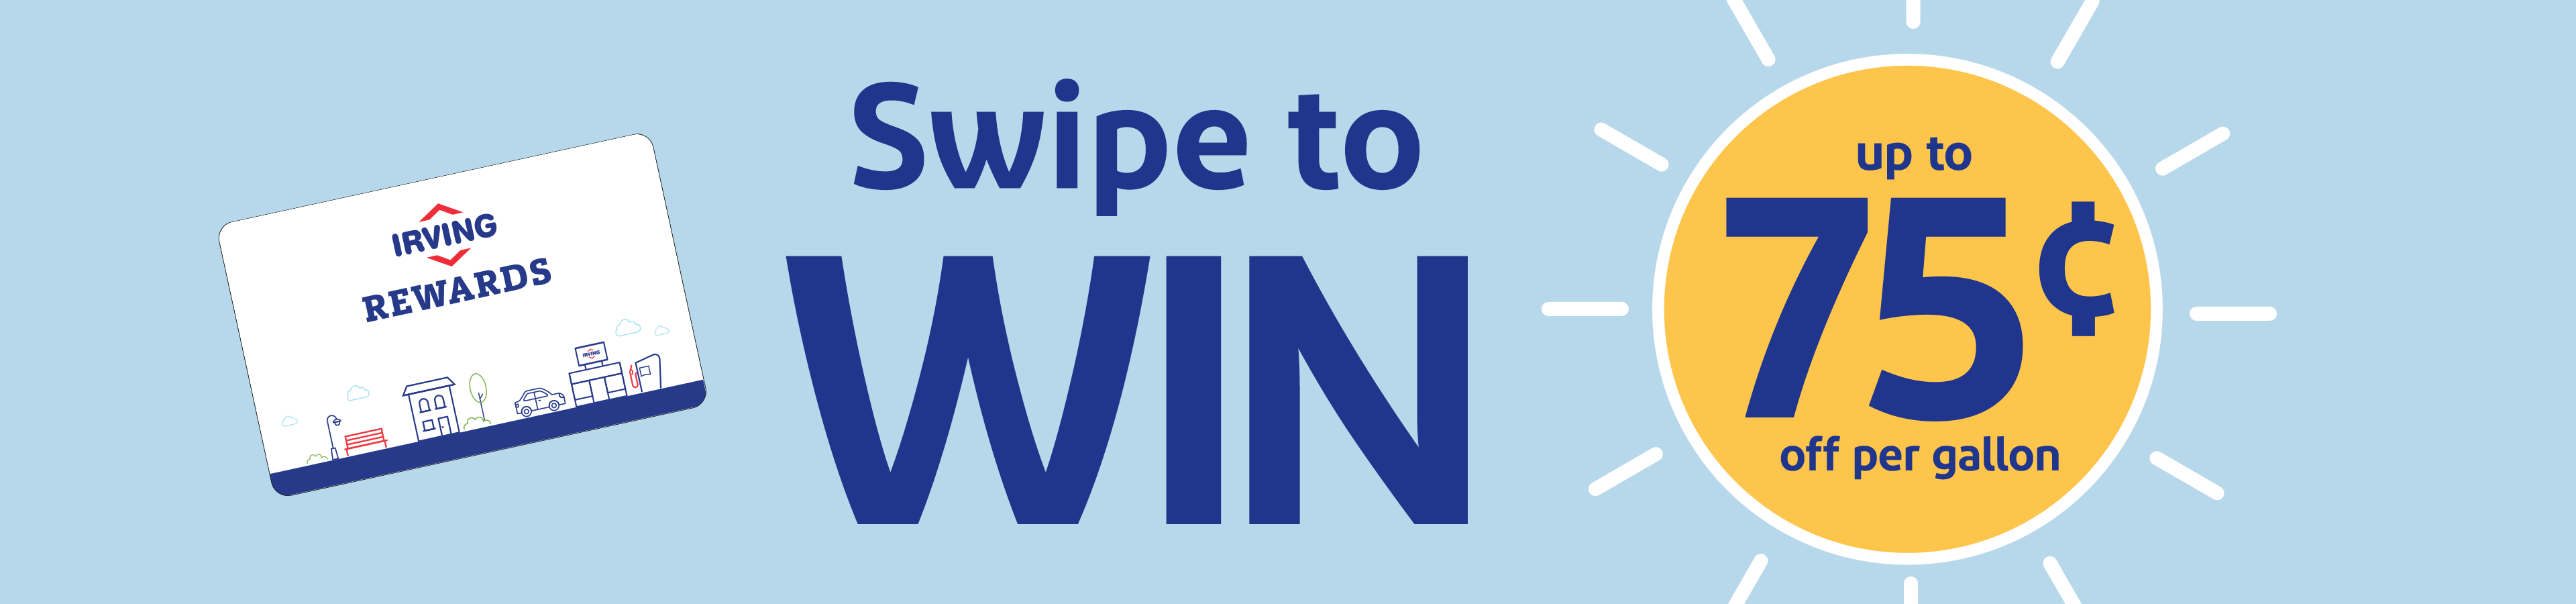 Swipe to win up to 75 cents per gallon